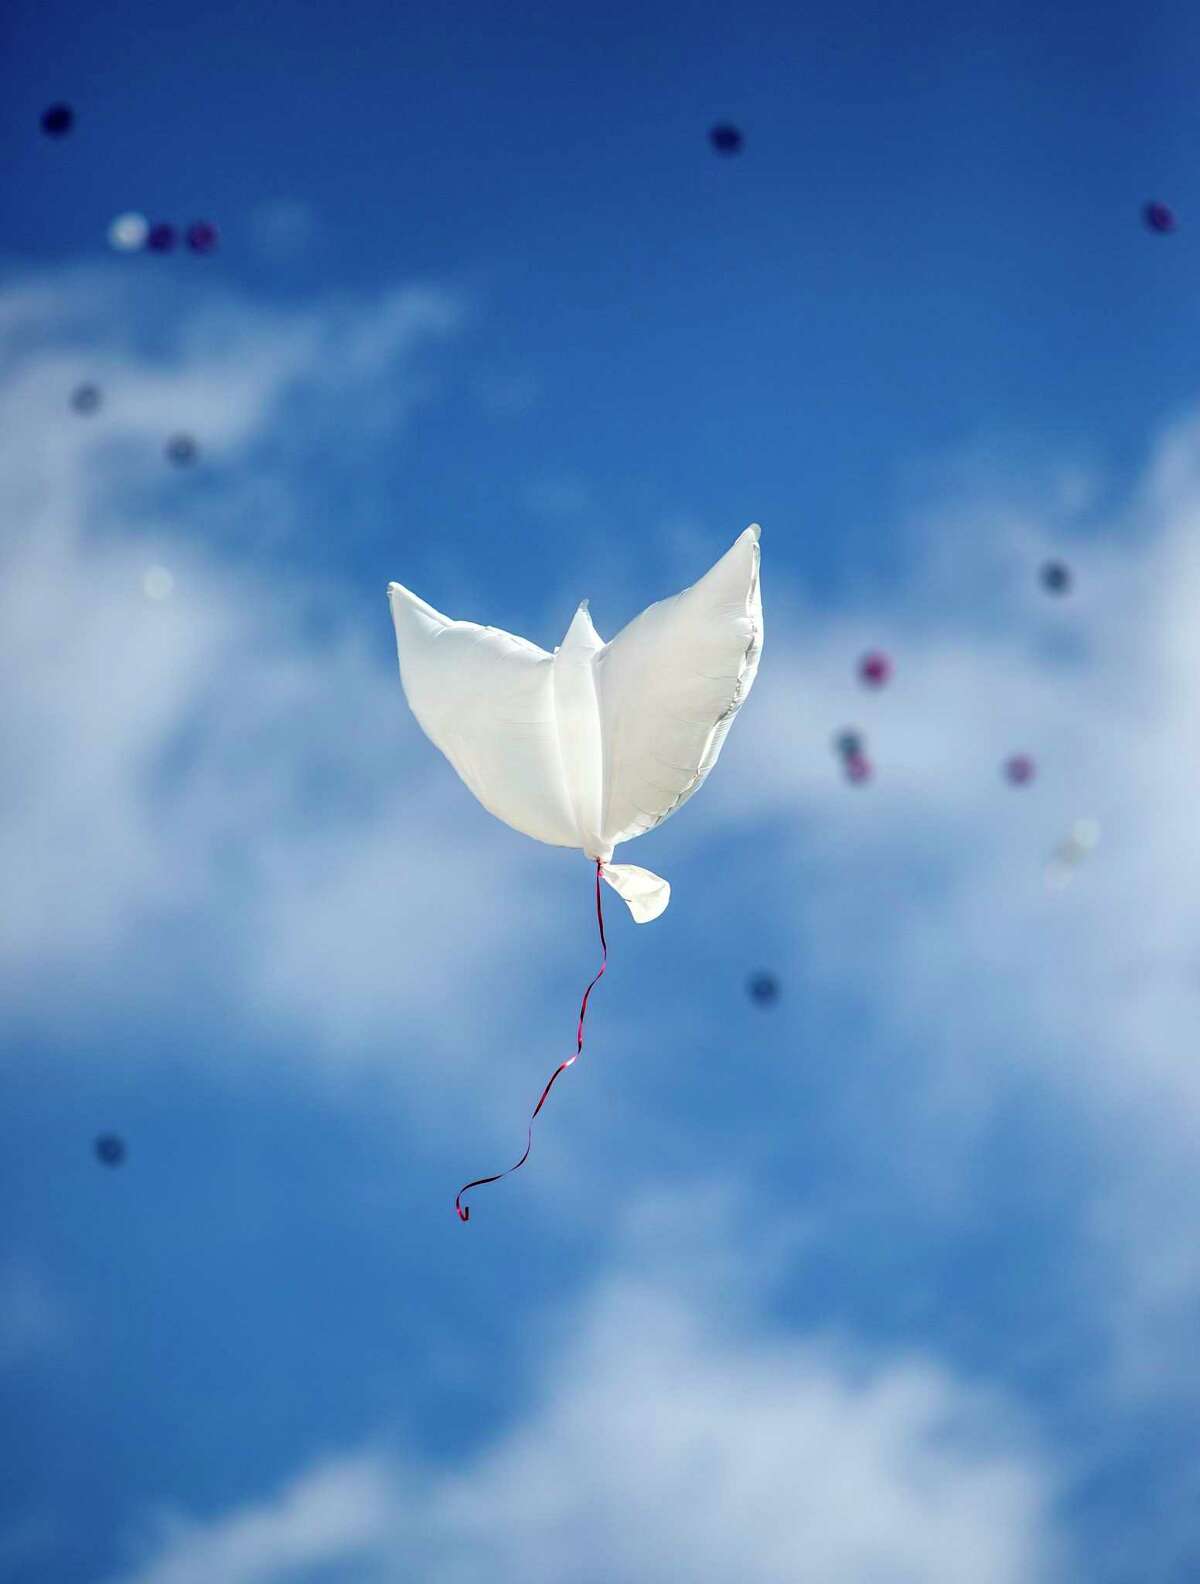 A dove-shaped balloon floats Wednesday into the sky during a balloon released at Antioch Baptist Church in remembrance of the 19 children and two adults killed May 24 at Robb Elementary School in Uvalde by a man with an assault rifle.